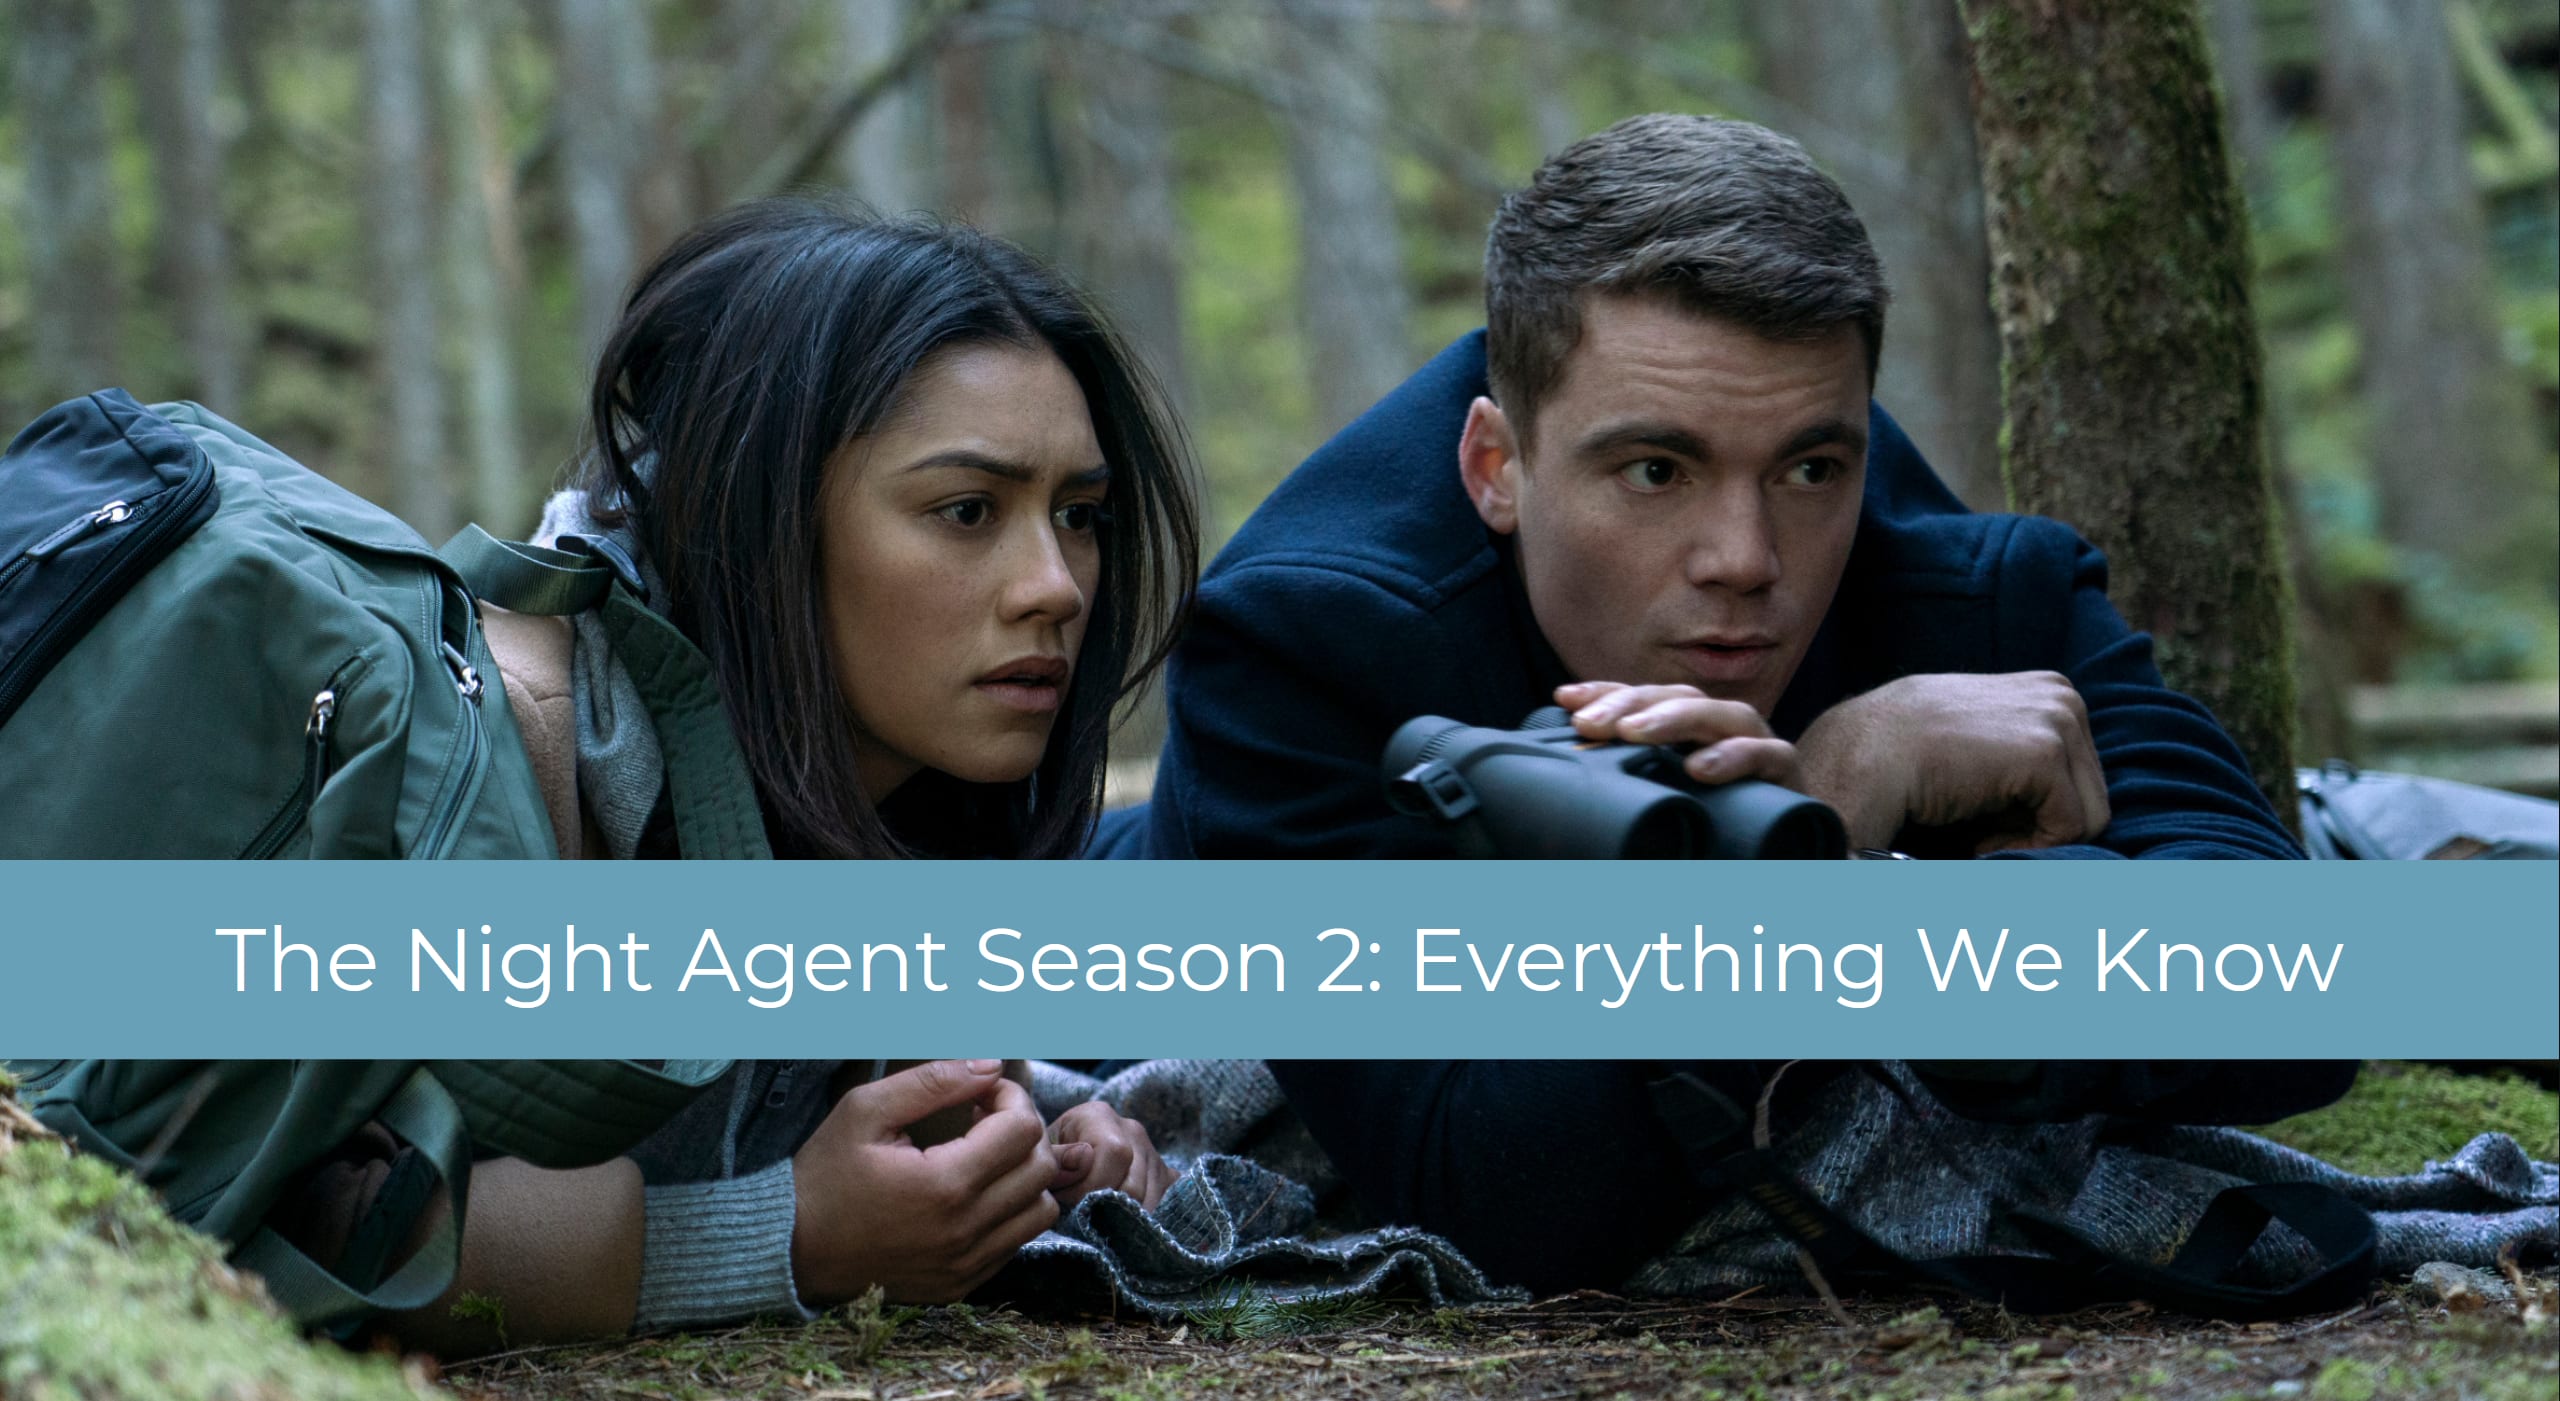 Everything We Know About Wednesday Season 2